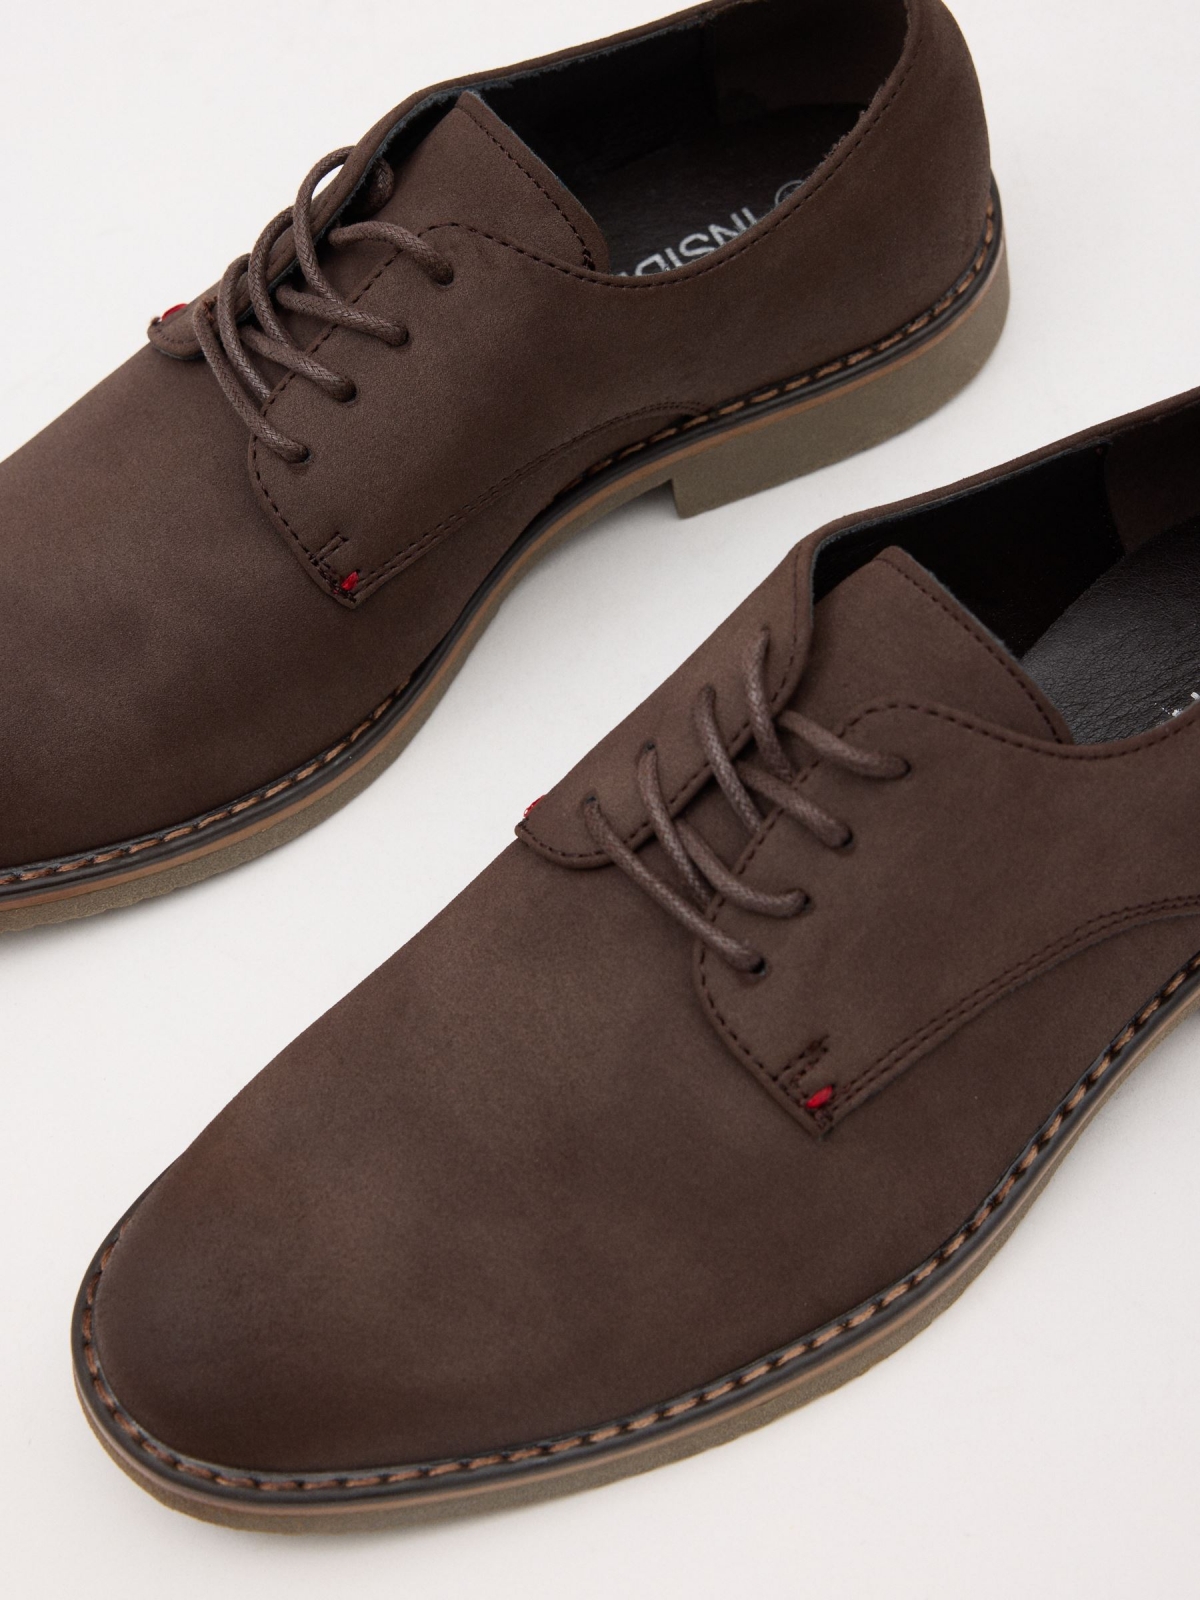 Classic leatherette shoe dark brown detail view